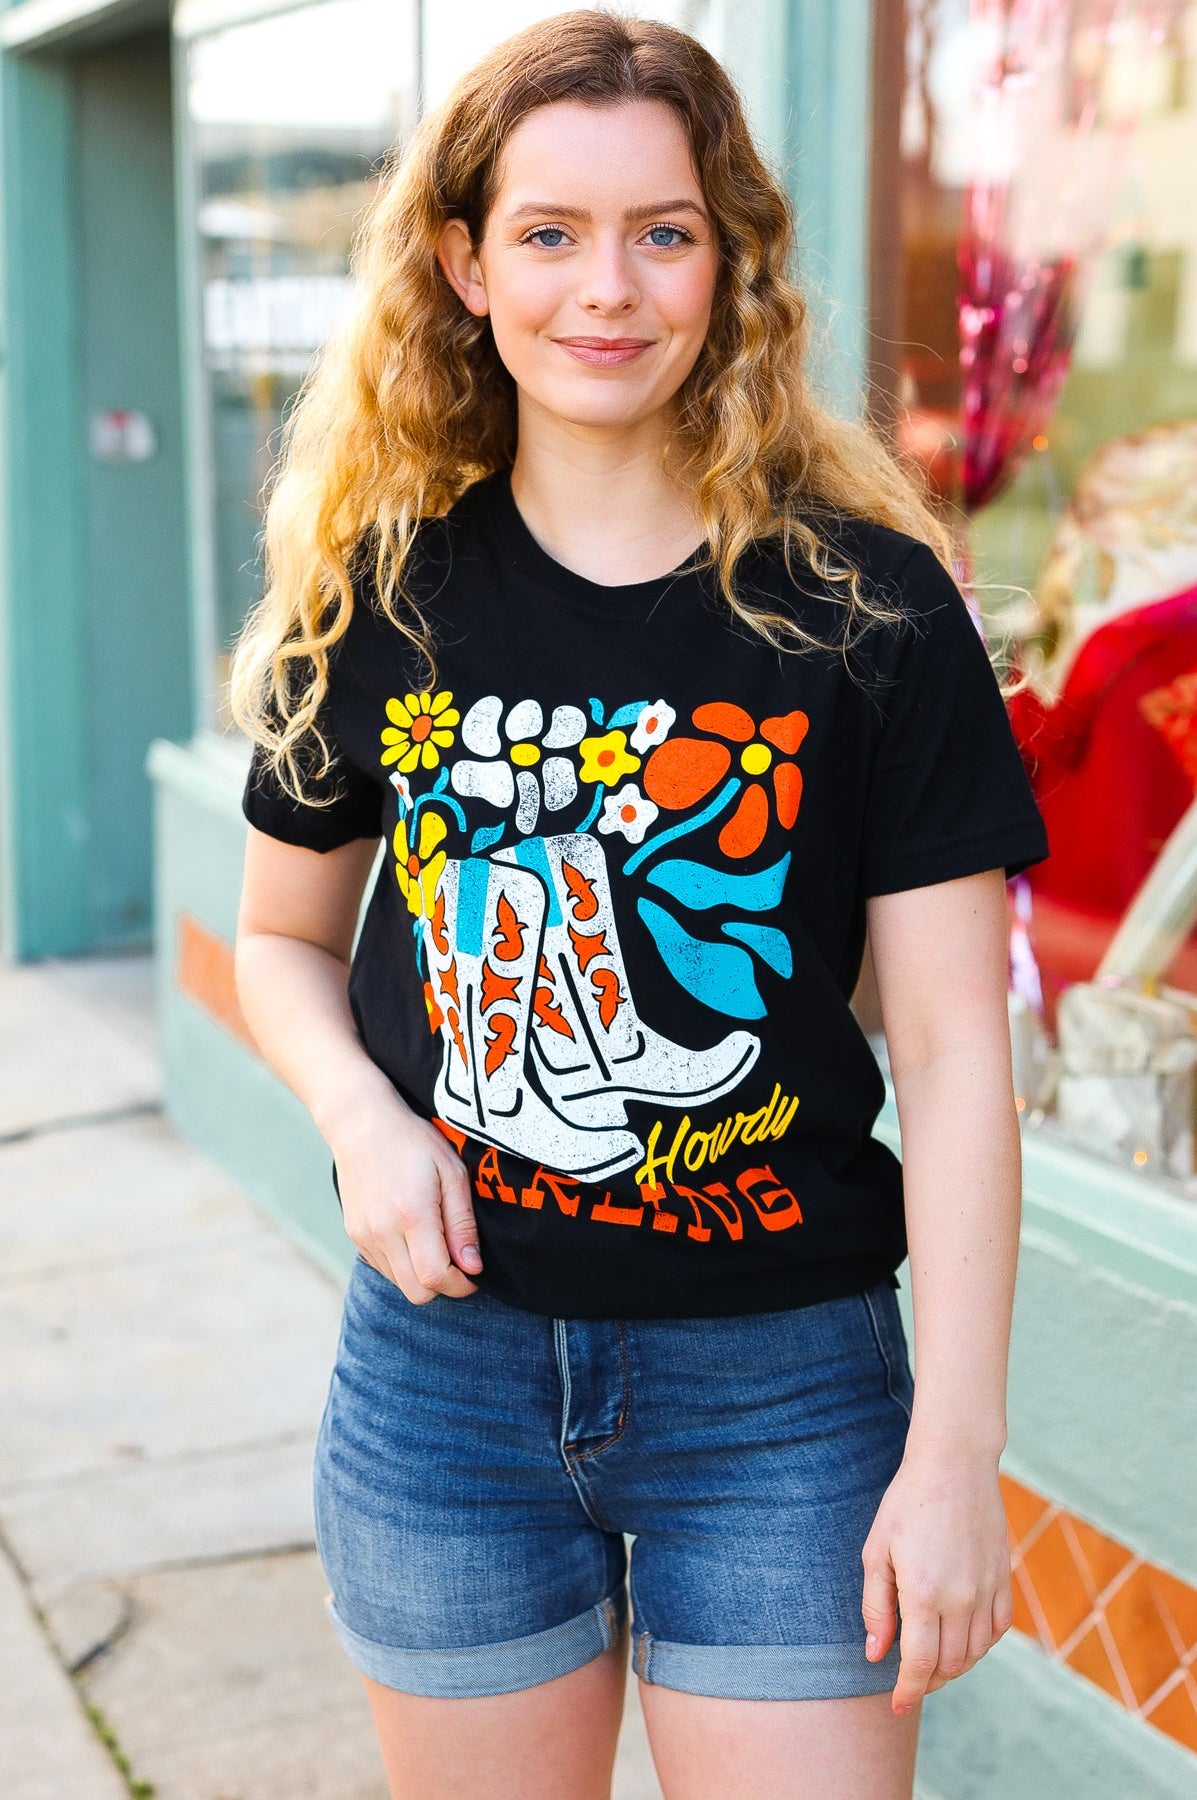 Black Cotton HOWDY DARLING Graphic Tee BOU TEE QUE